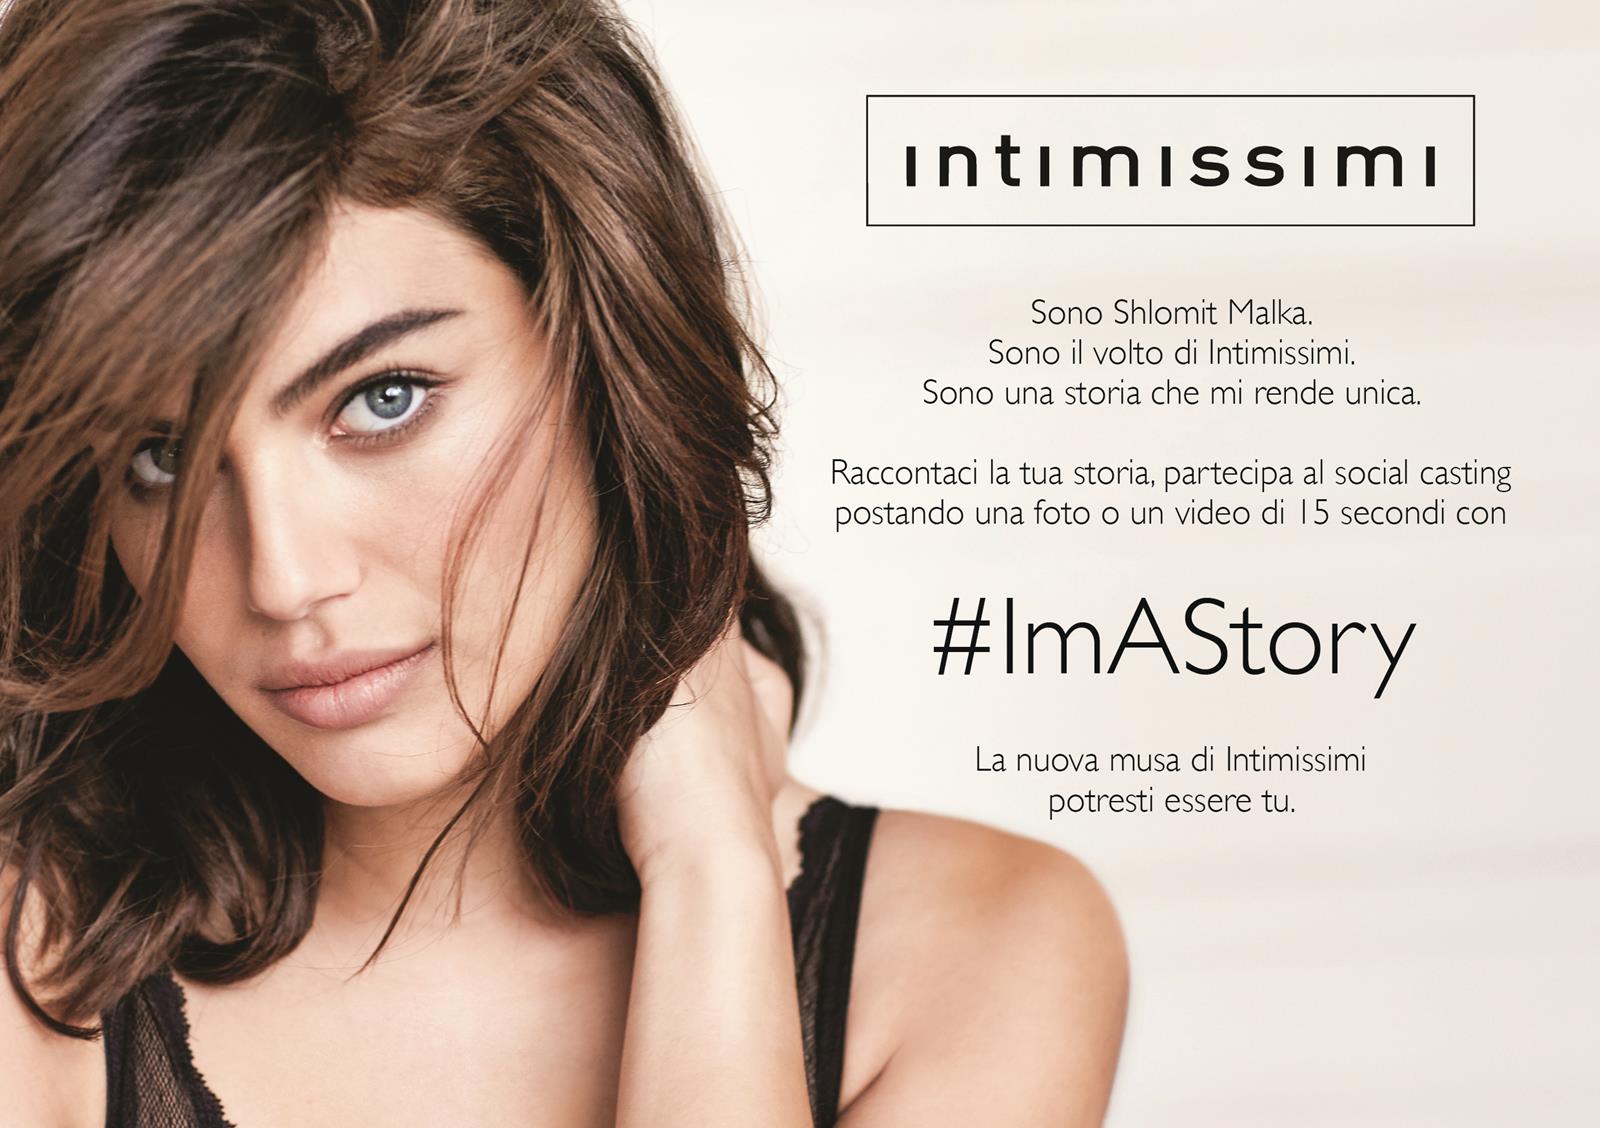 Intimissimi contest I'm A Story